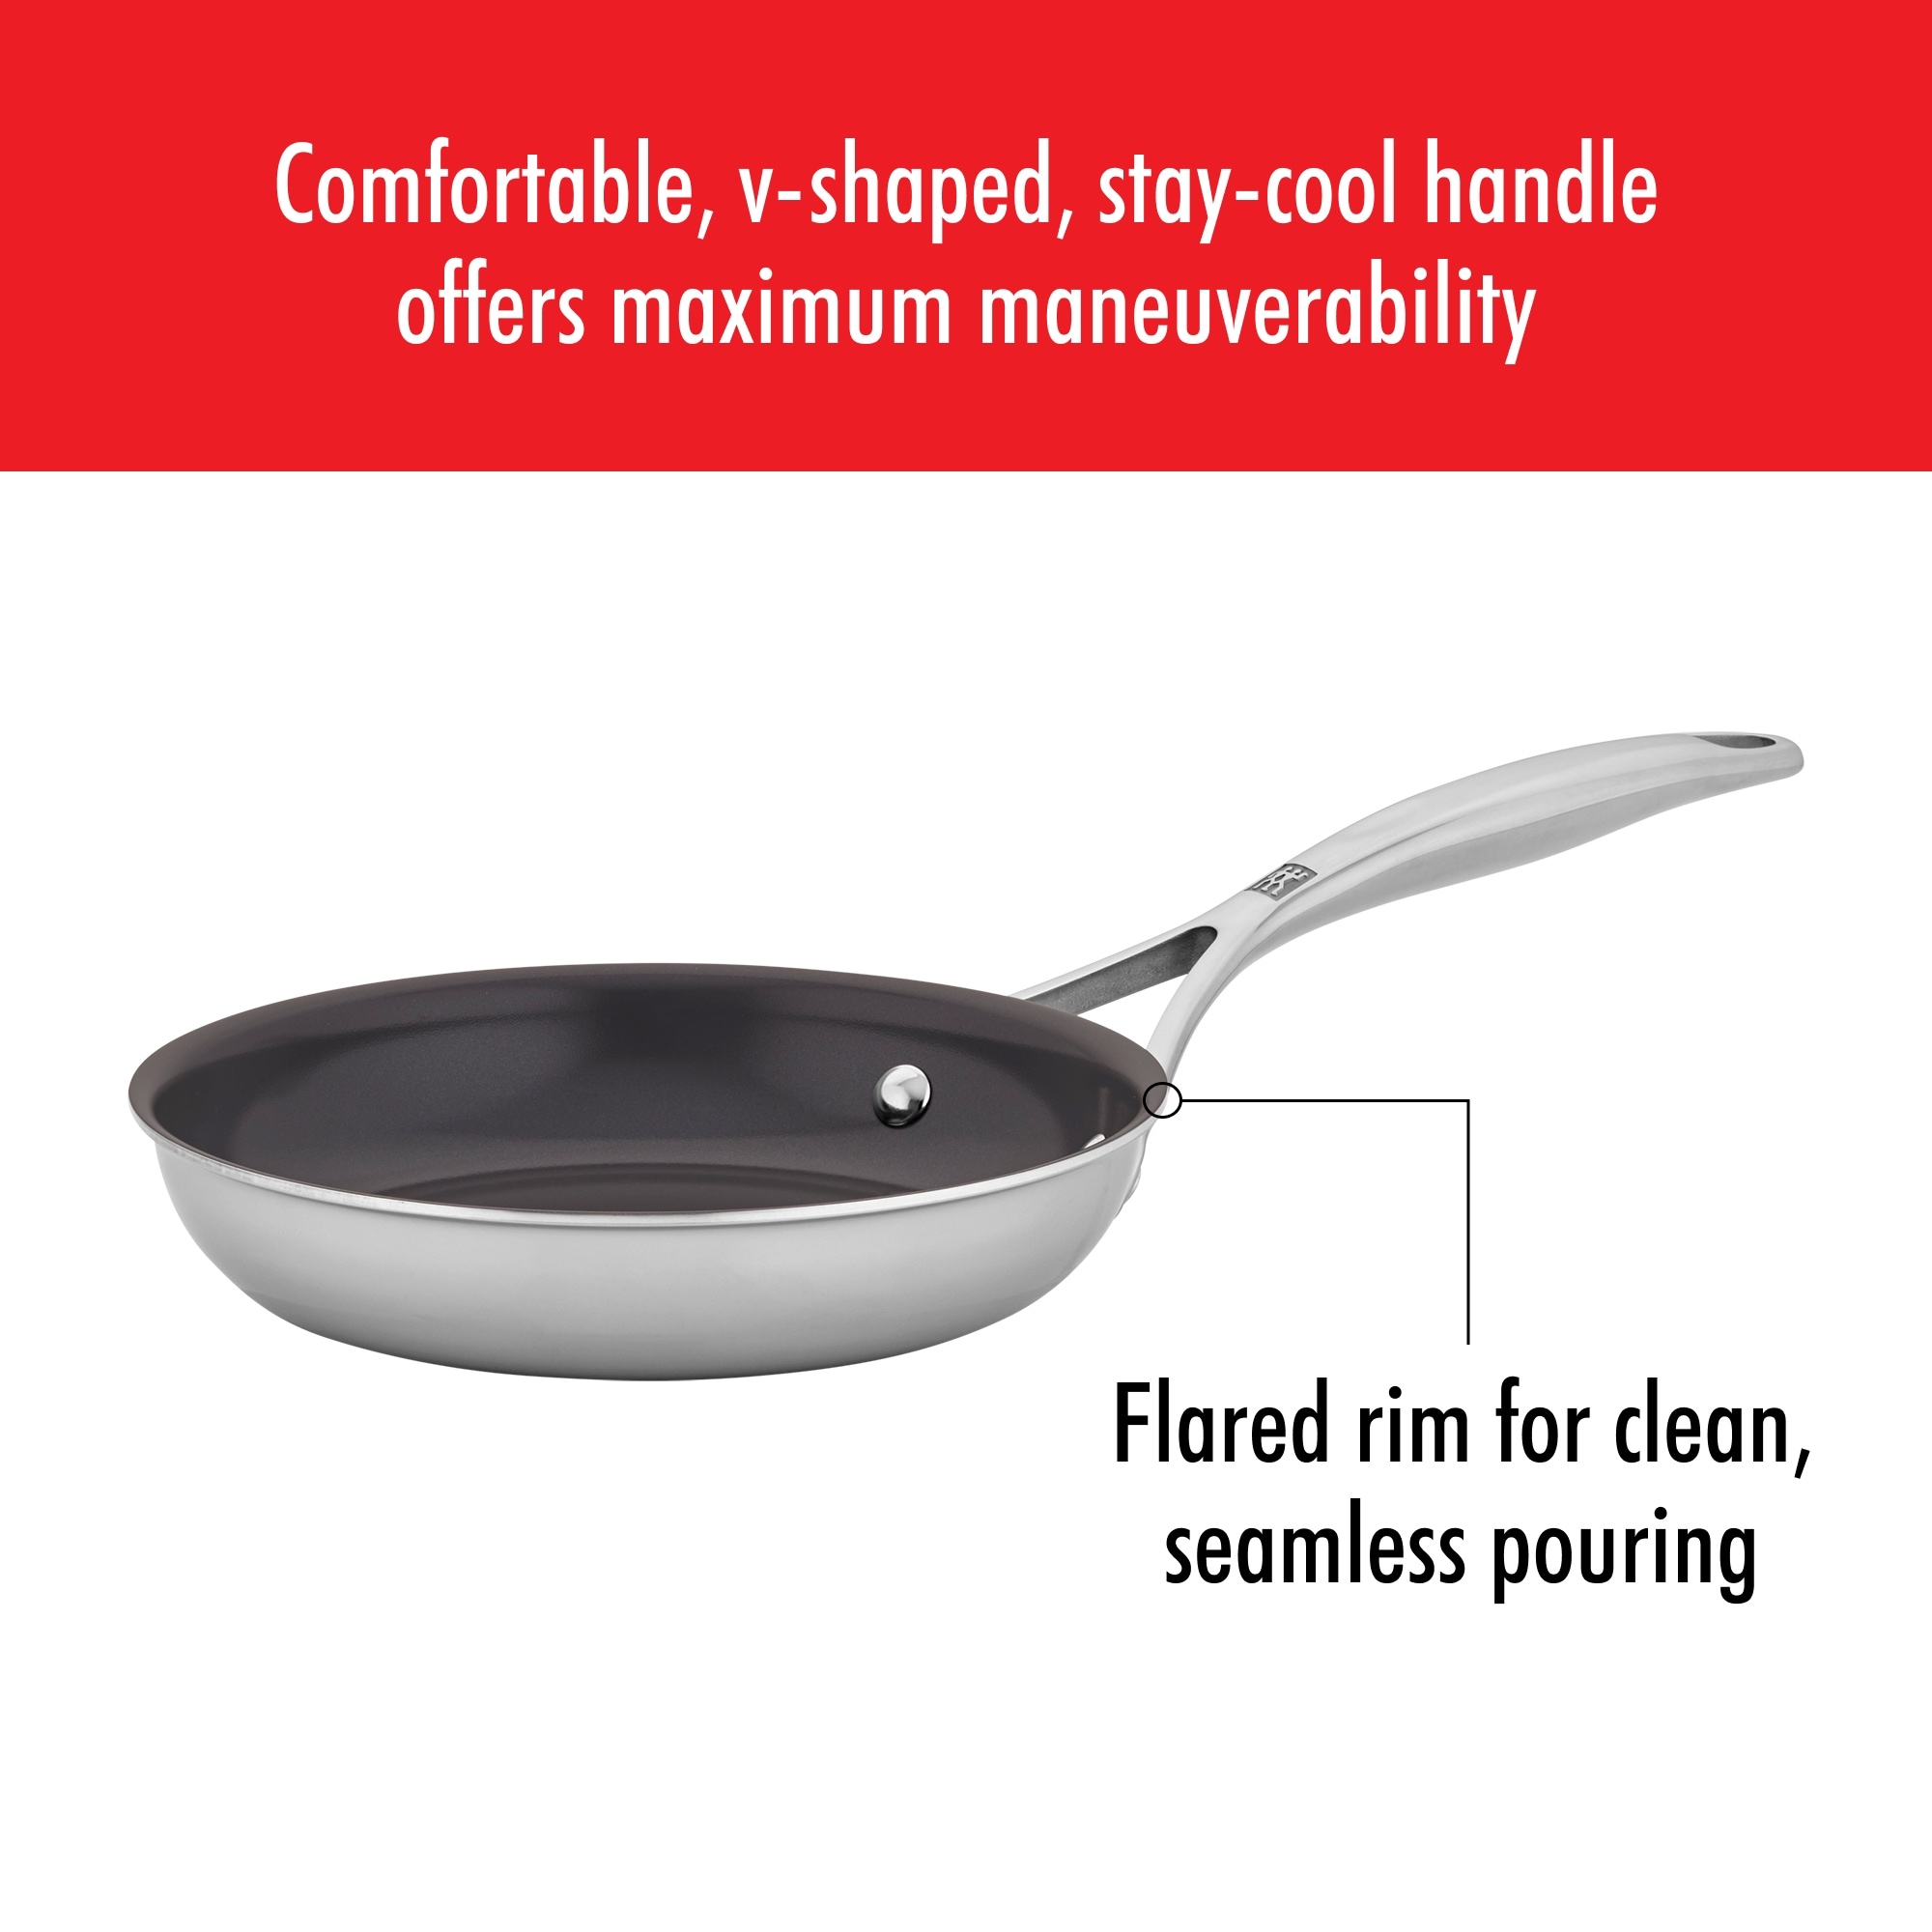 Zwilling Energy Plus 8-Inch Stainless Steel Ceramic Nonstick Fry Pan